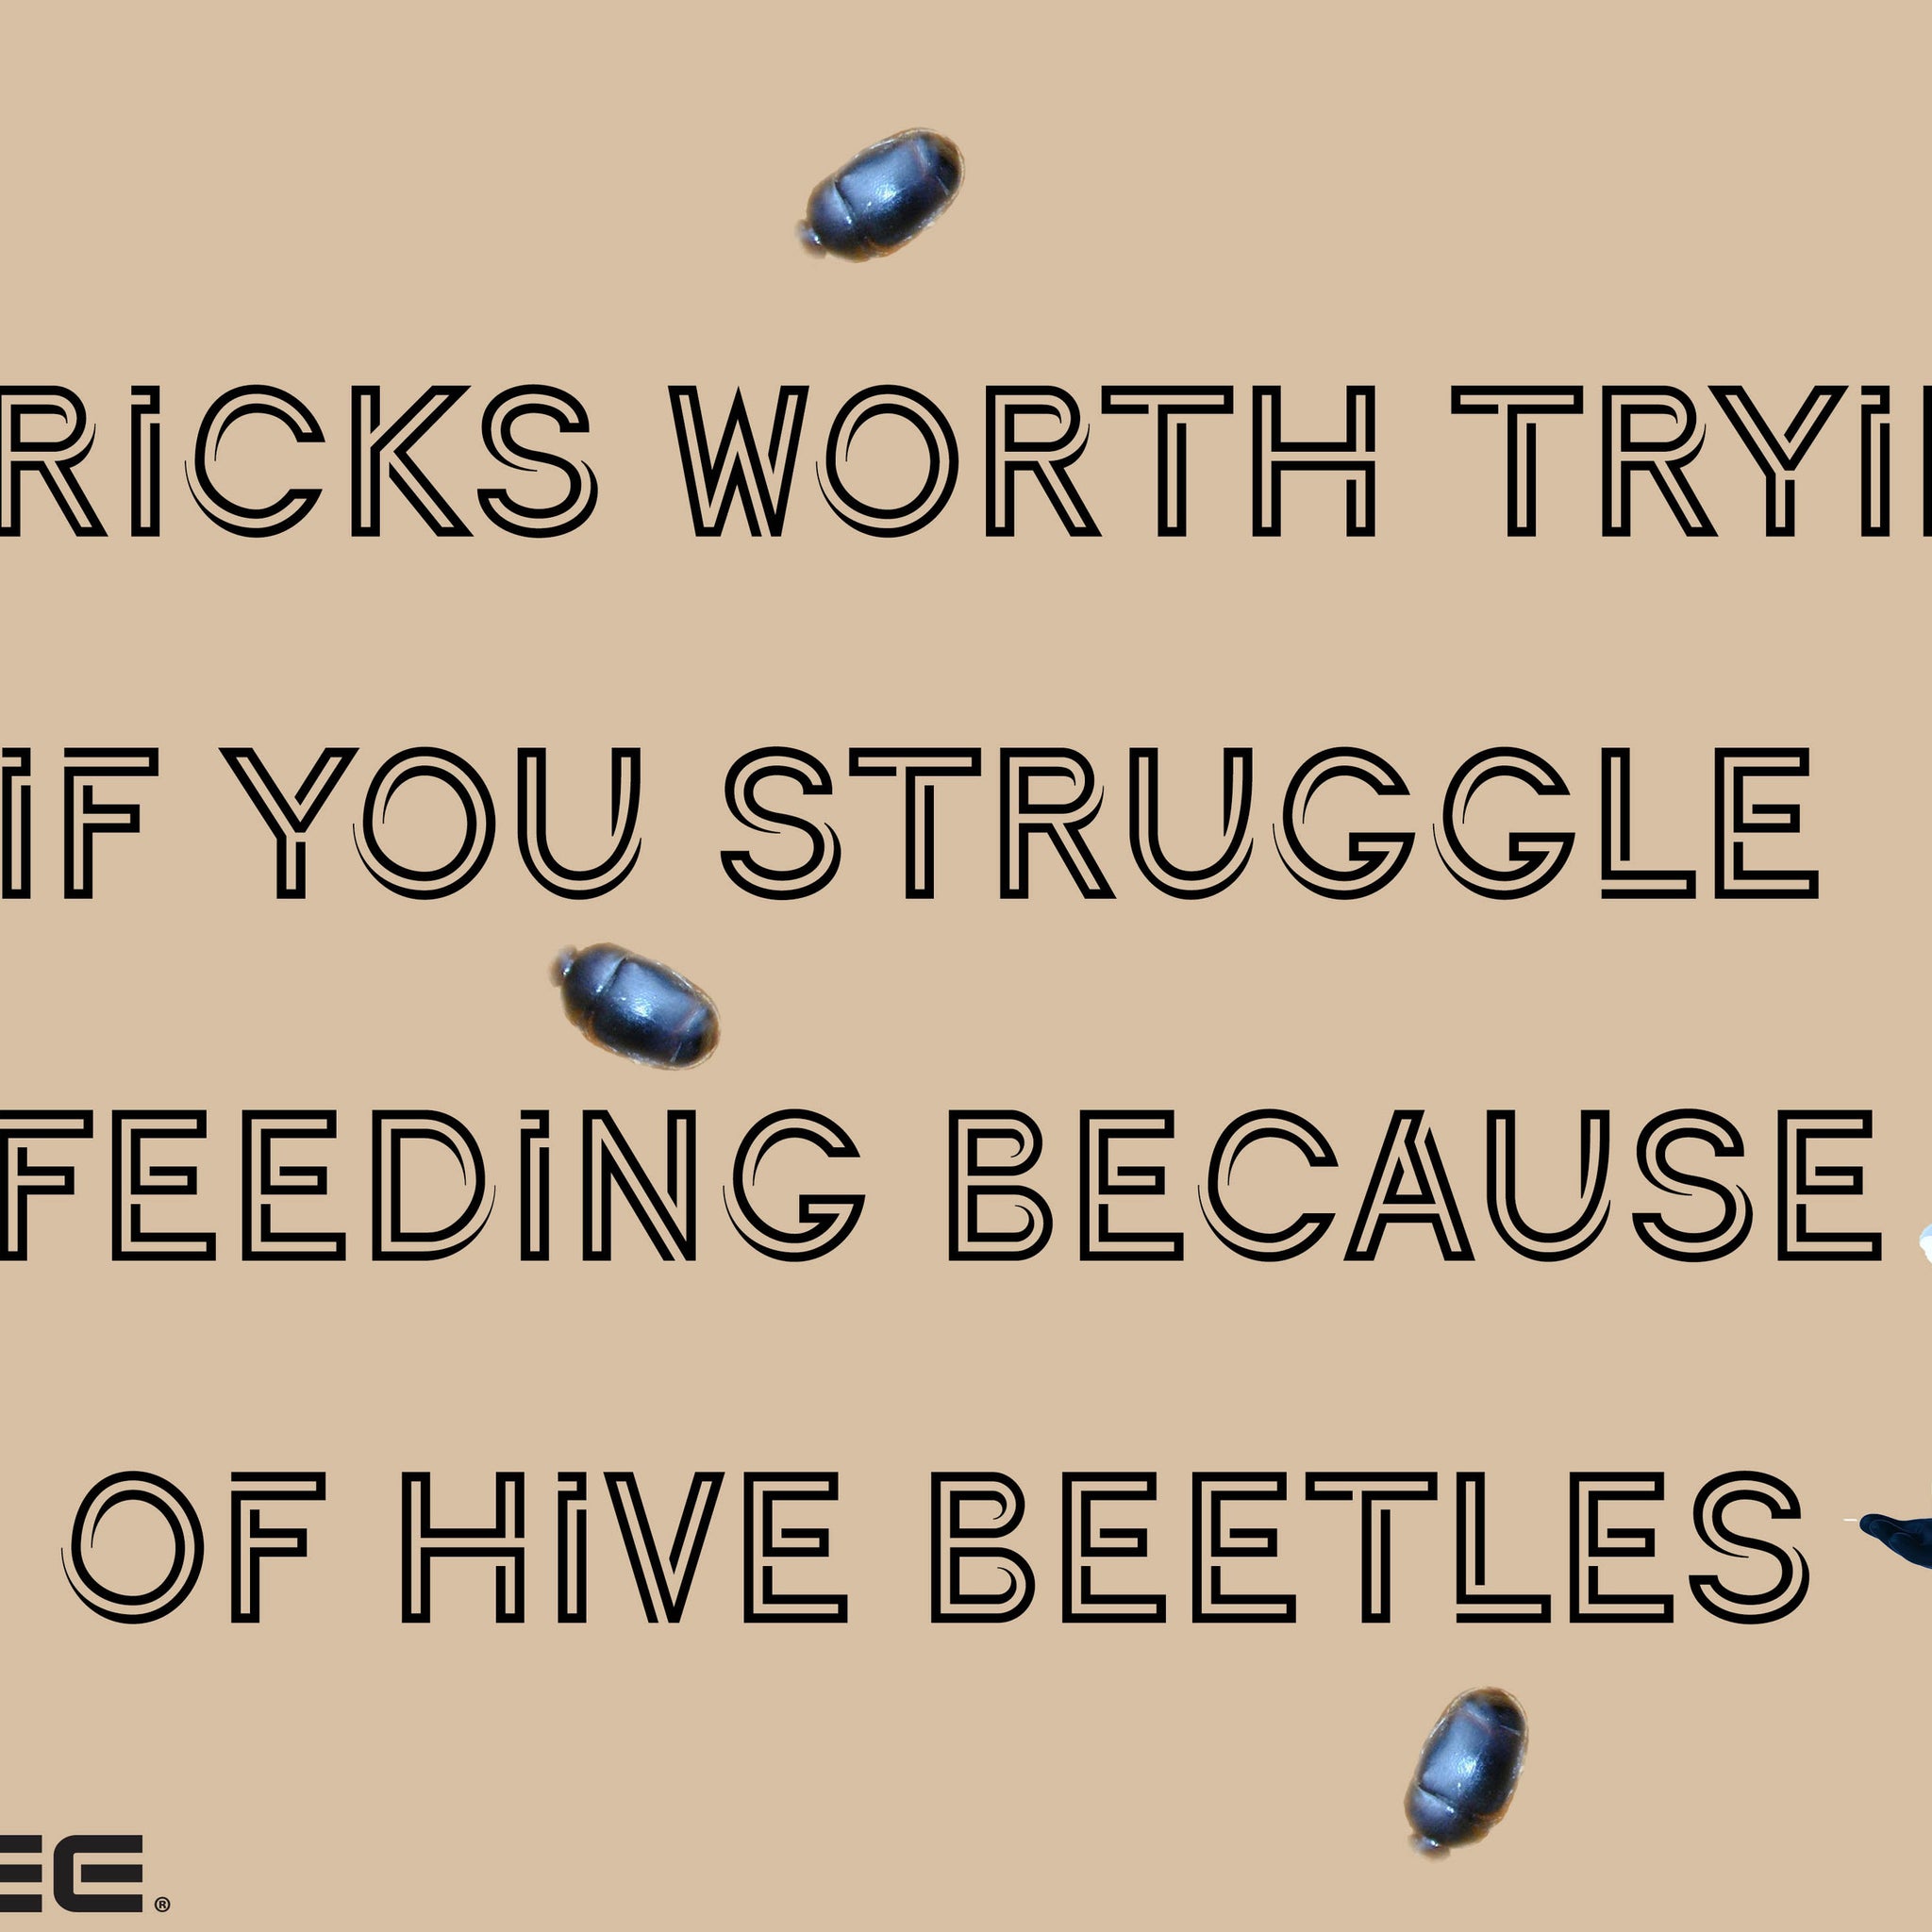 5 tricks worth trying if you struggle feeding because of hive beetles: